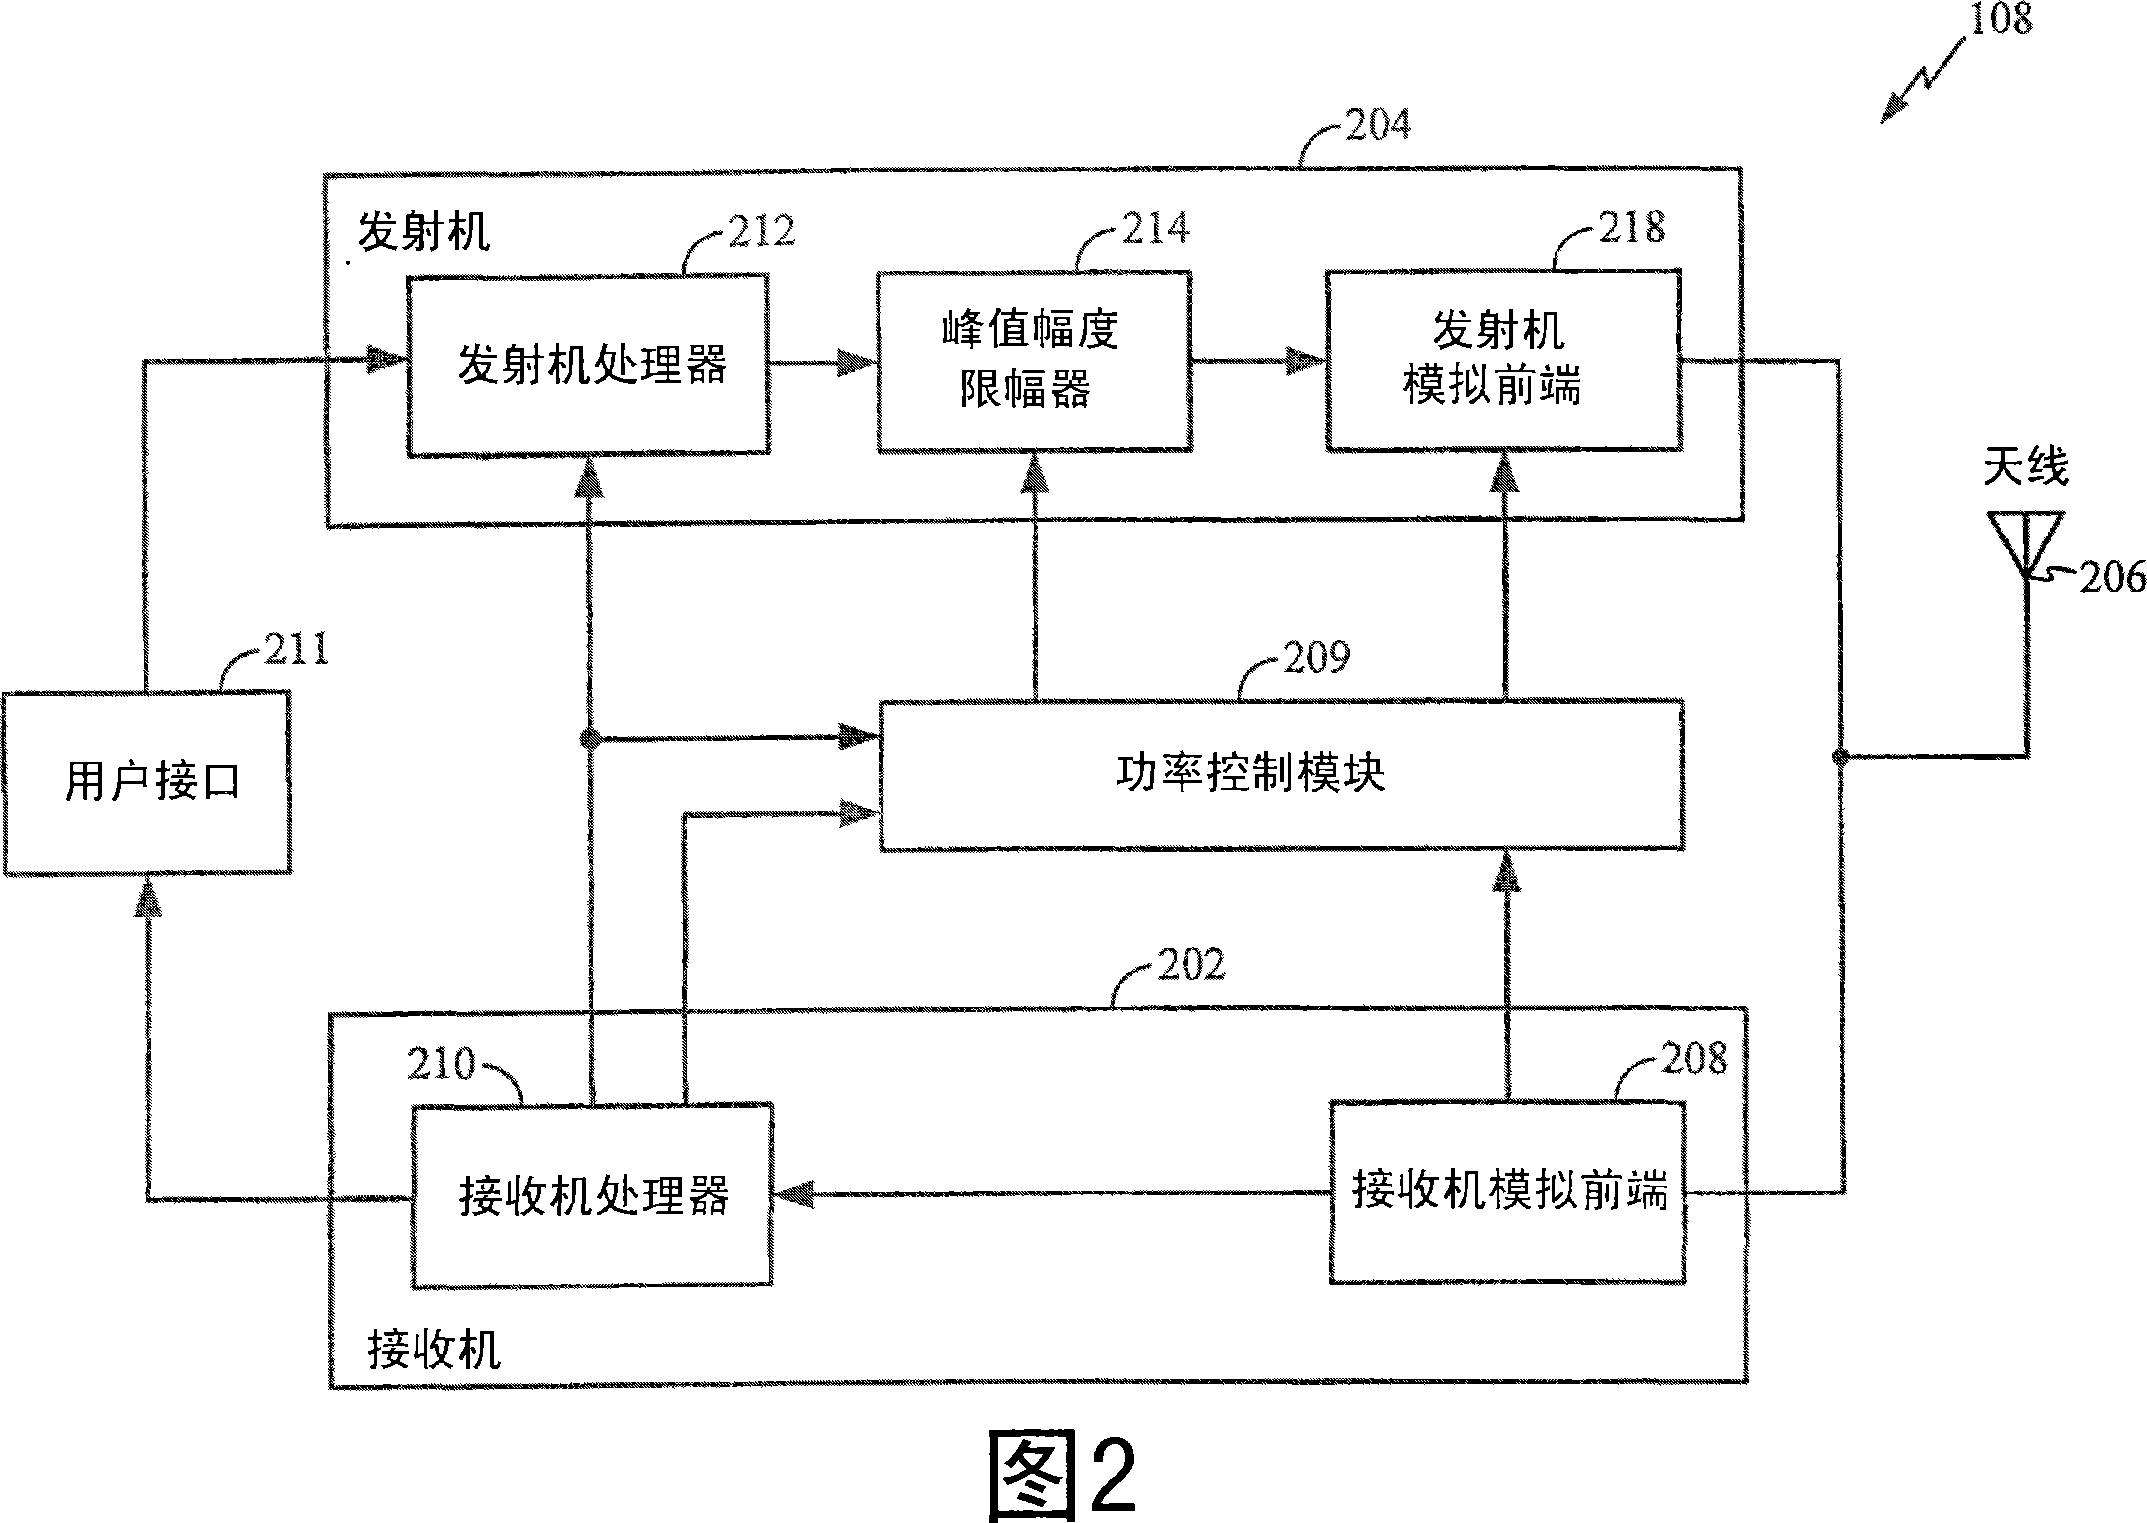 Method and apparatus for controlling transmit power in a wireless communications device